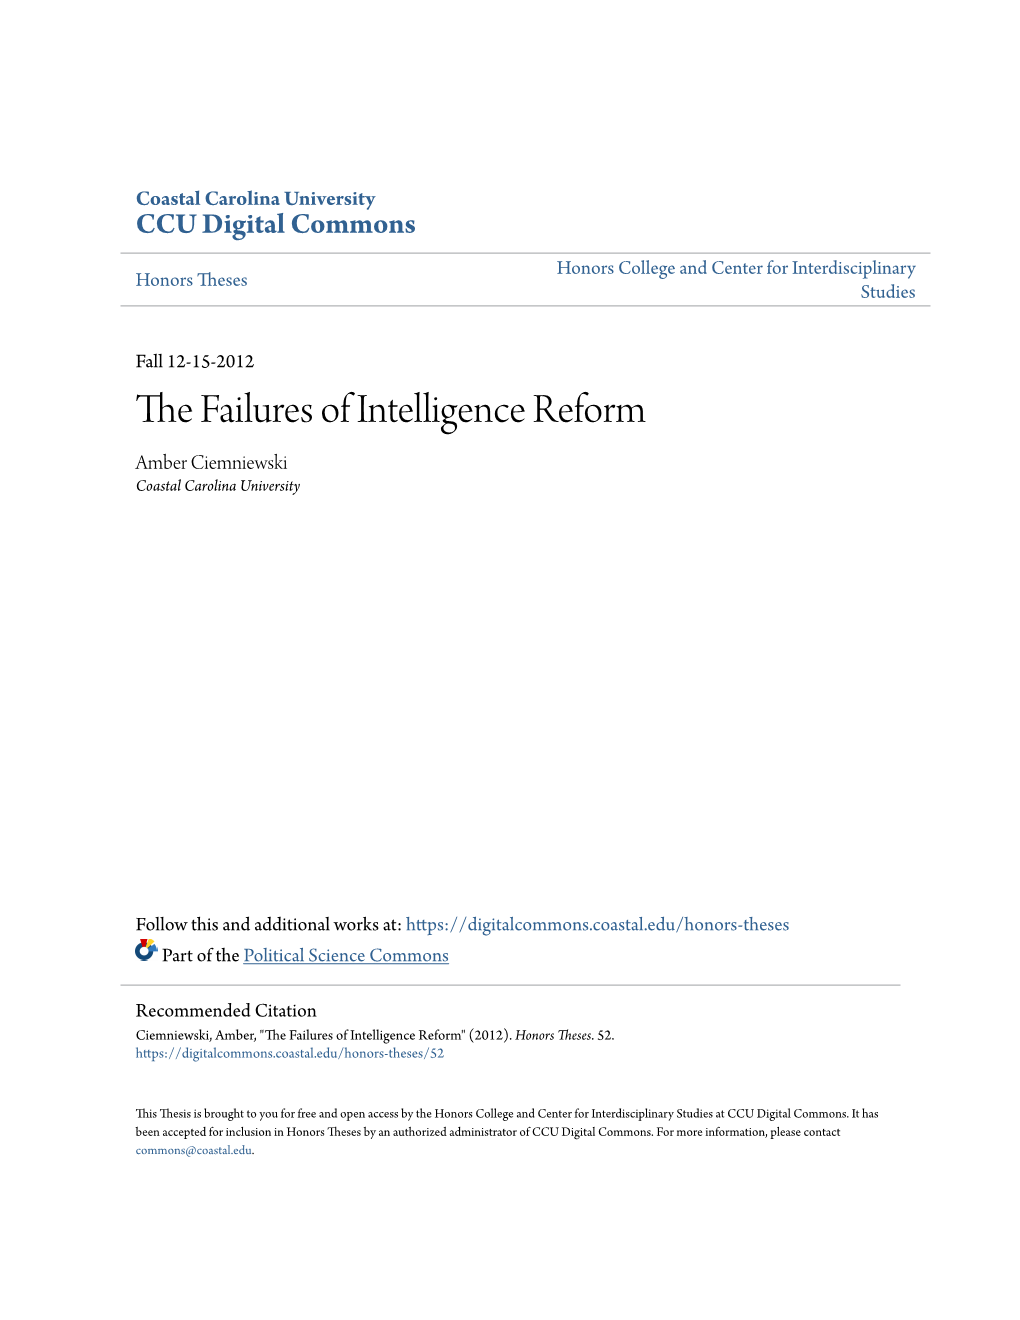 The Failures of Intelligence Reform